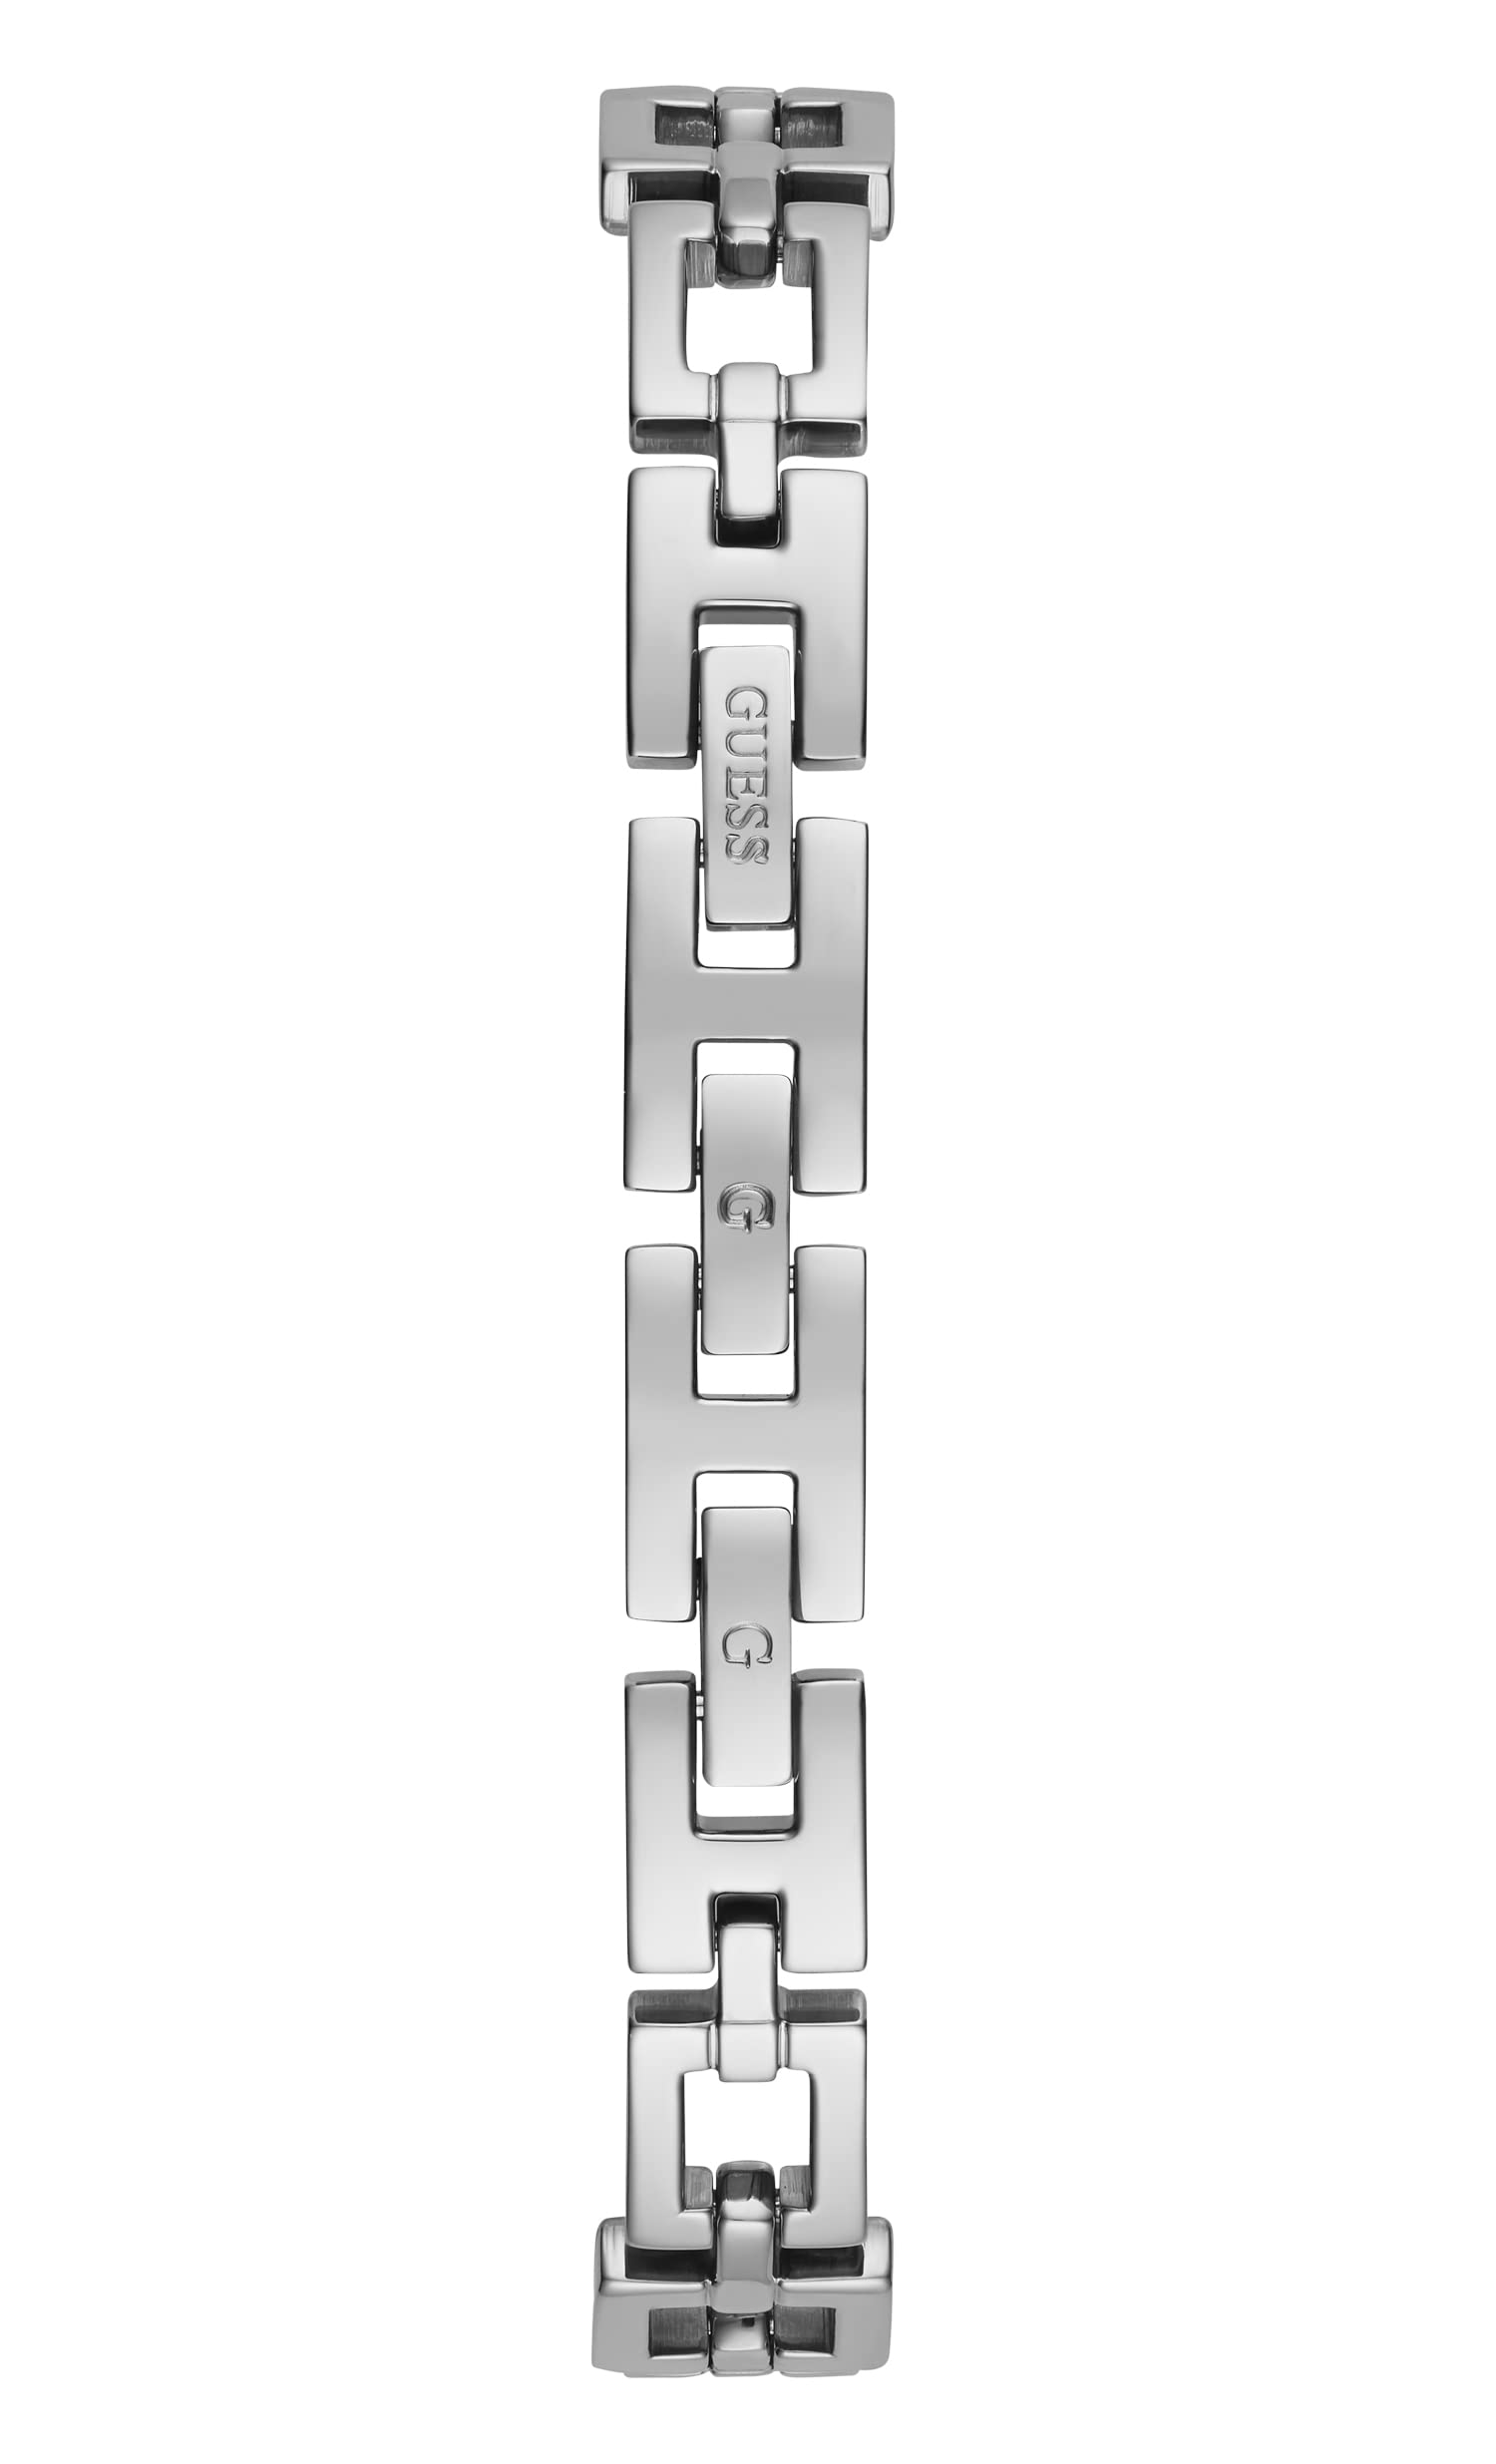 GUESS Ladies 26mm Watch